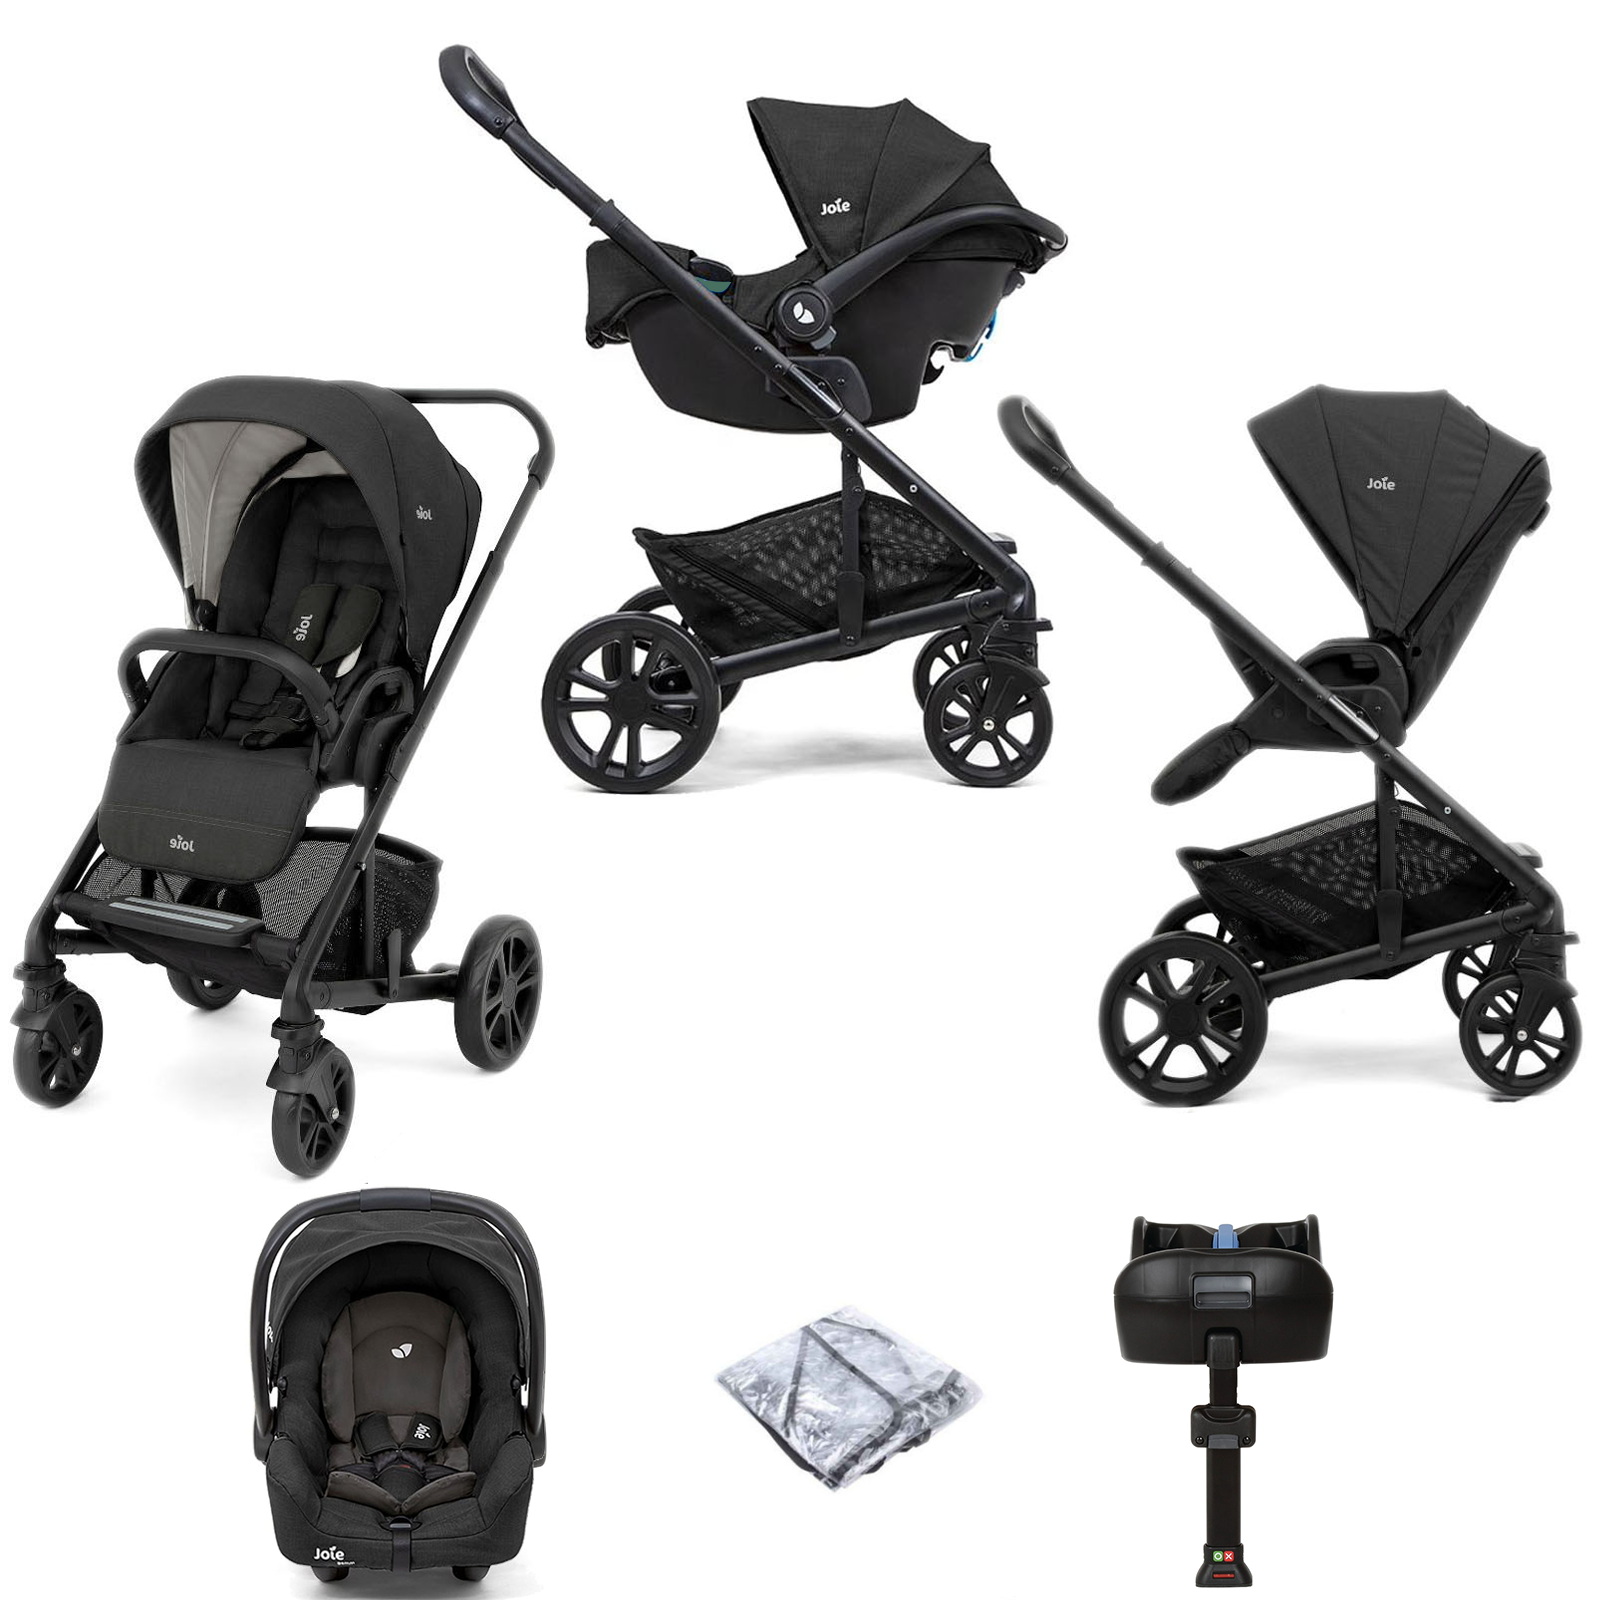 Joie Chrome (Gemm) Travel System with ISOFIX Base - Shale